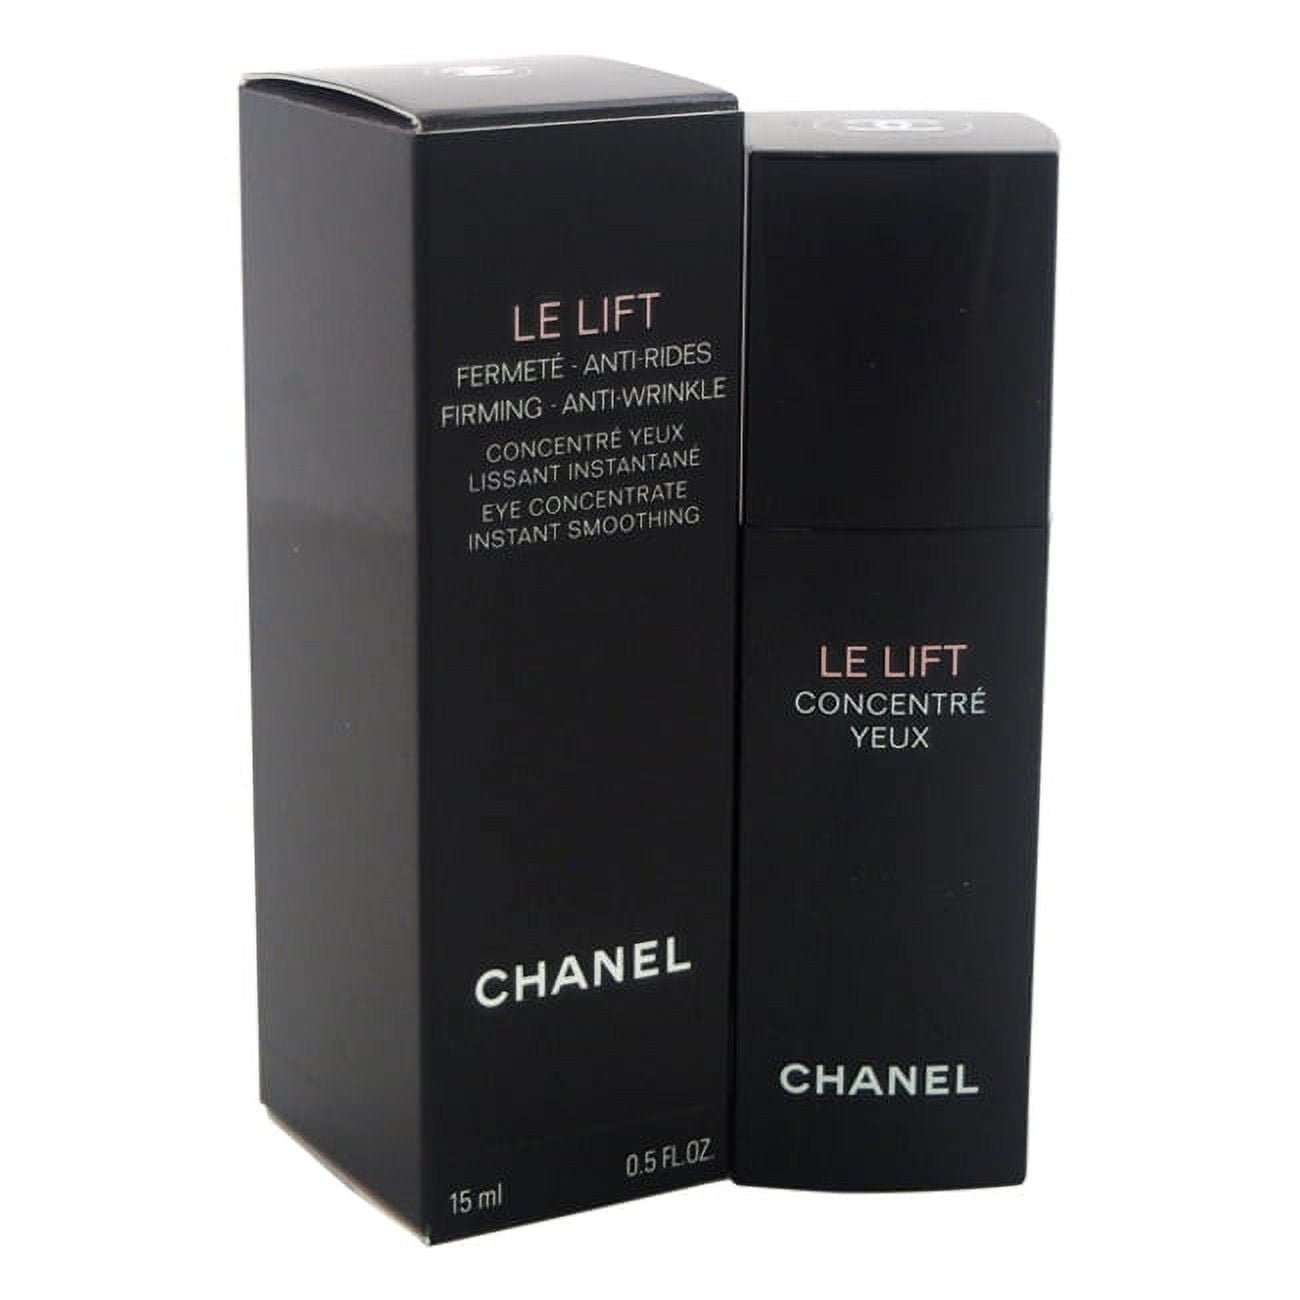 Le Lift Firming - Anti-Wrinkle Eye Concentrate Instant Smoothing by Chanel  for Women - 0.5 oz Cream